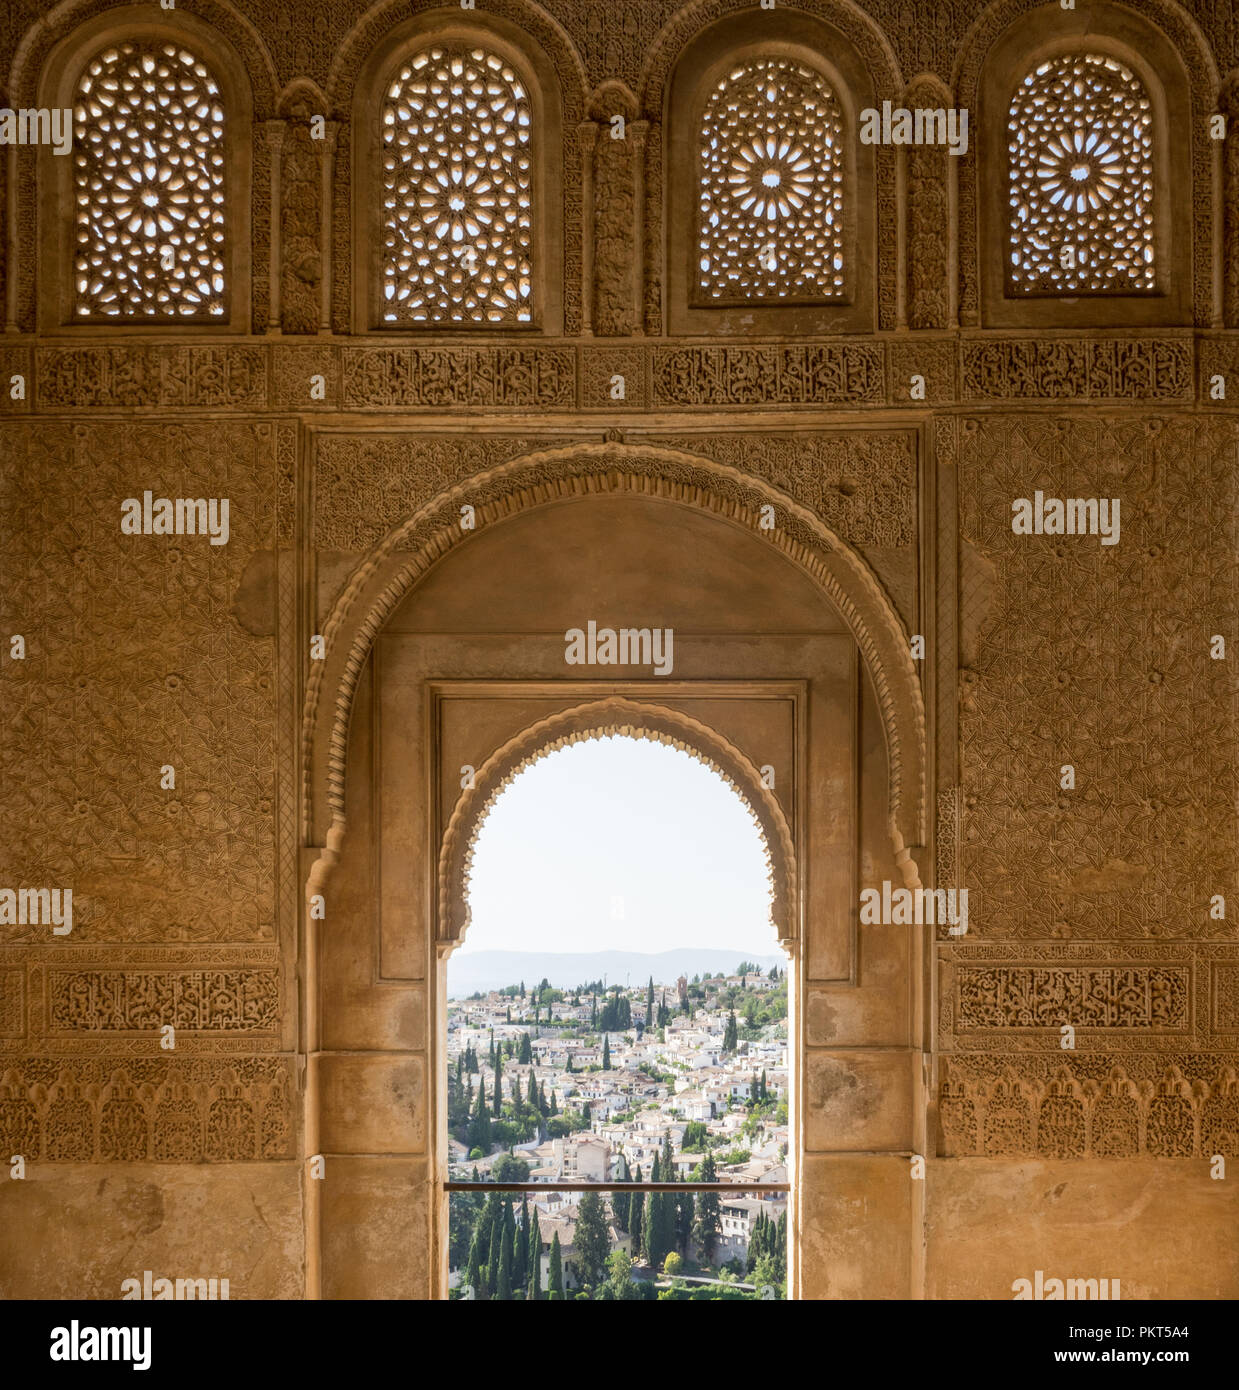 View of the Albayzin district of Granada, Spain, from an arched window in the Alhambra palace near sunset at Granada, Spain, Europe on a bright sunny  Stock Photo